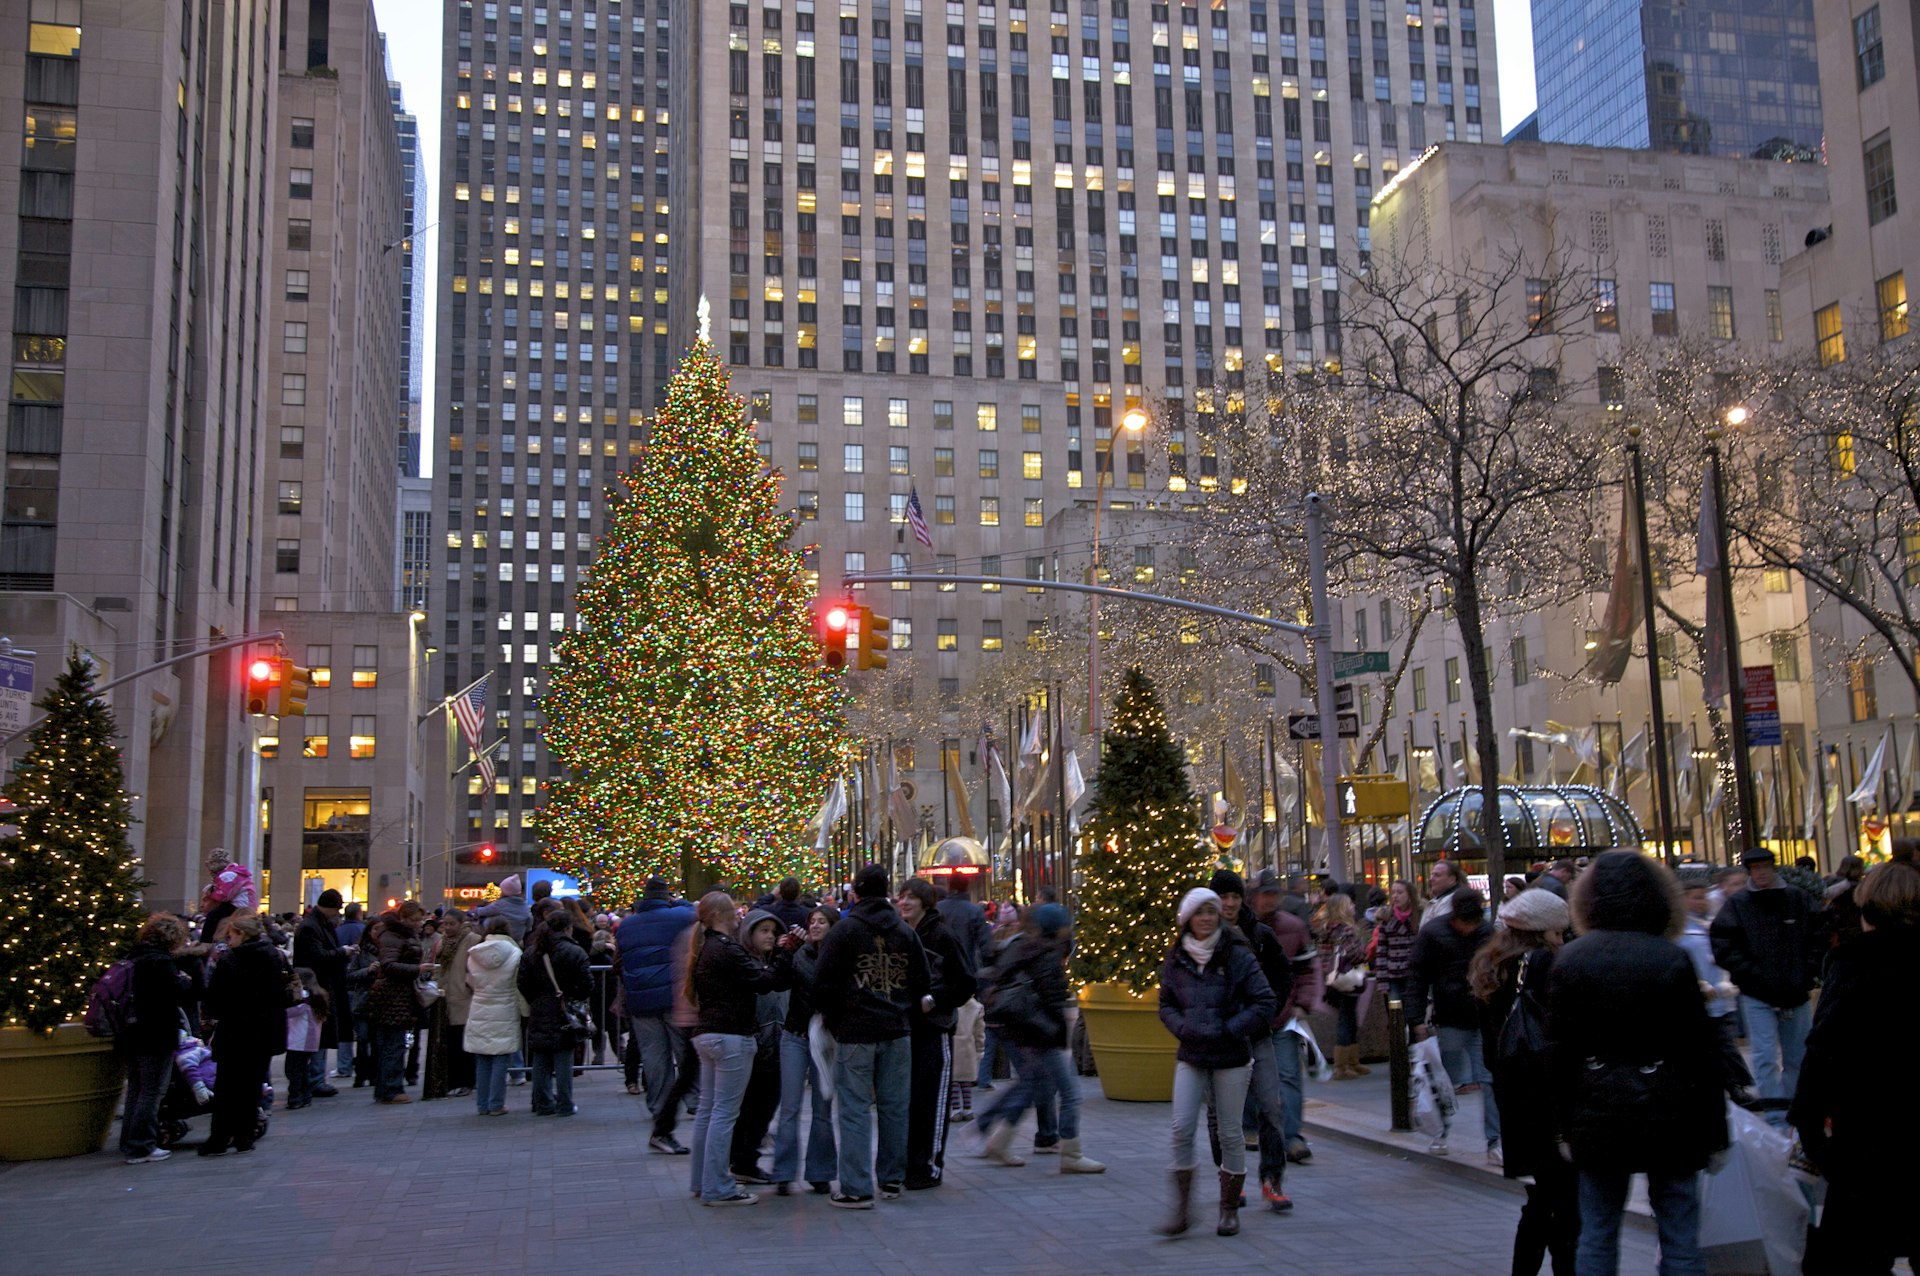 People viewing the Christmas tree at Rockefeller Center at dusk, New York, NY, USA